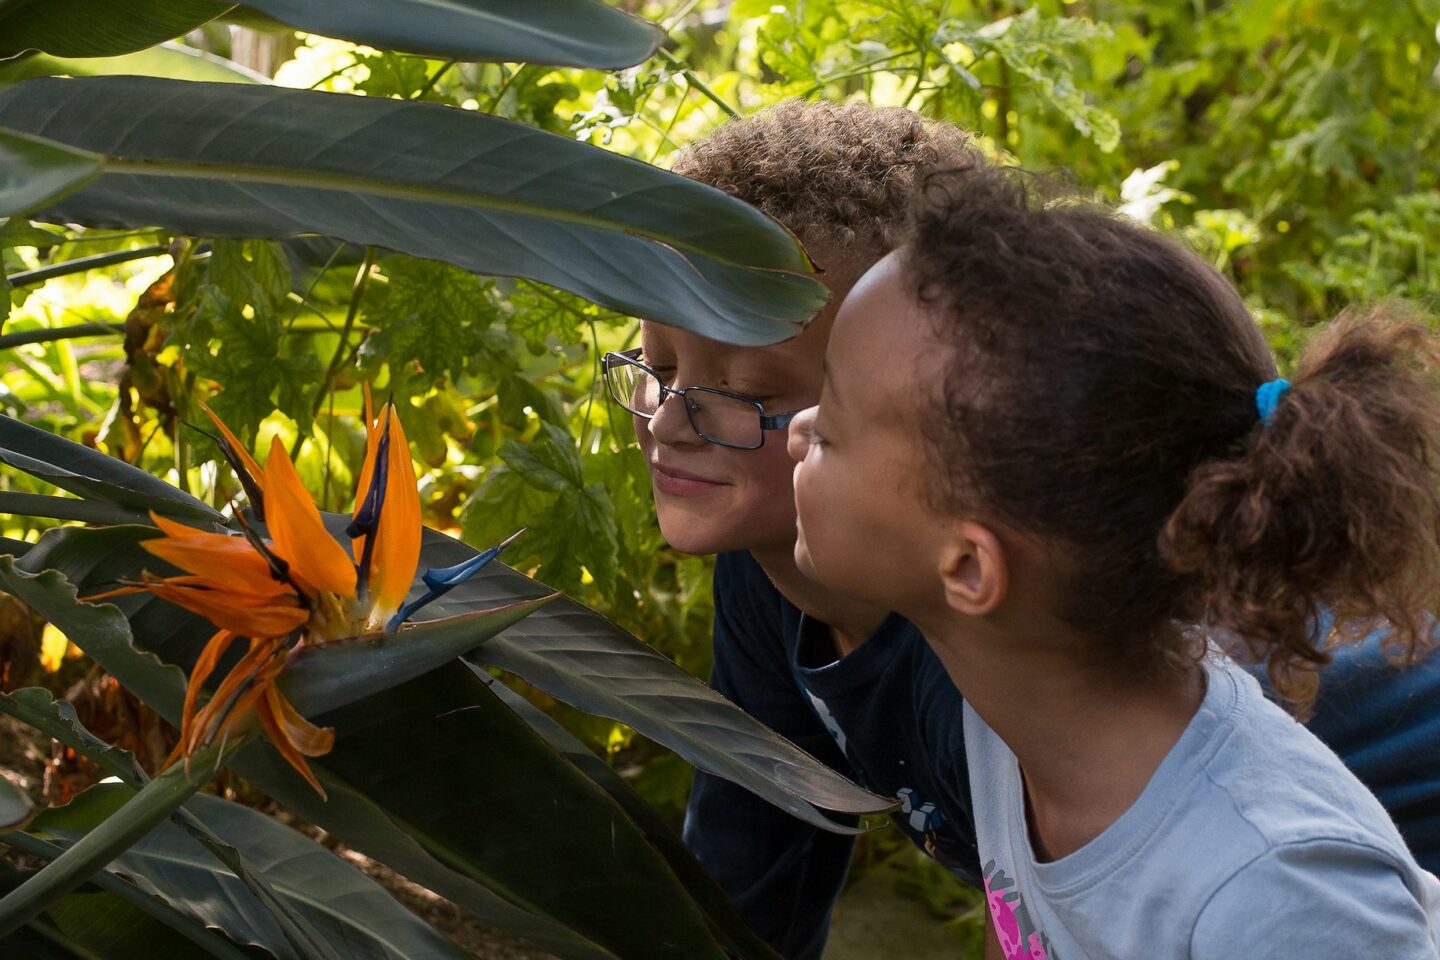 Children’s Gardening: Sow and Grow (Ages 5 to 7)